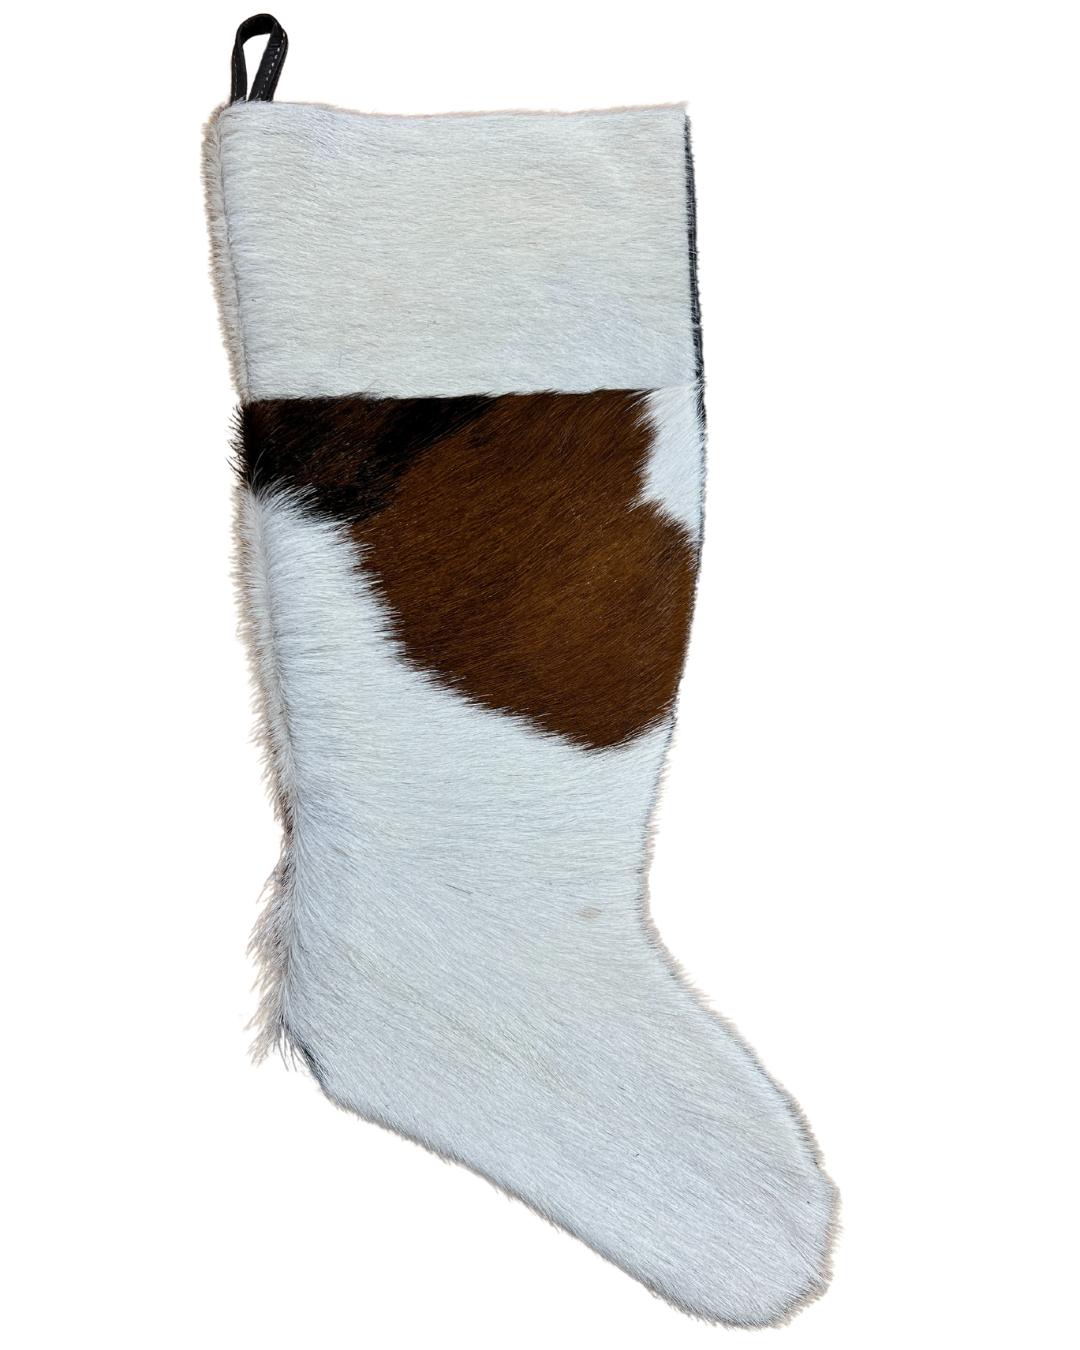 Cowhide Christmas Stocking - White & Brown - Large